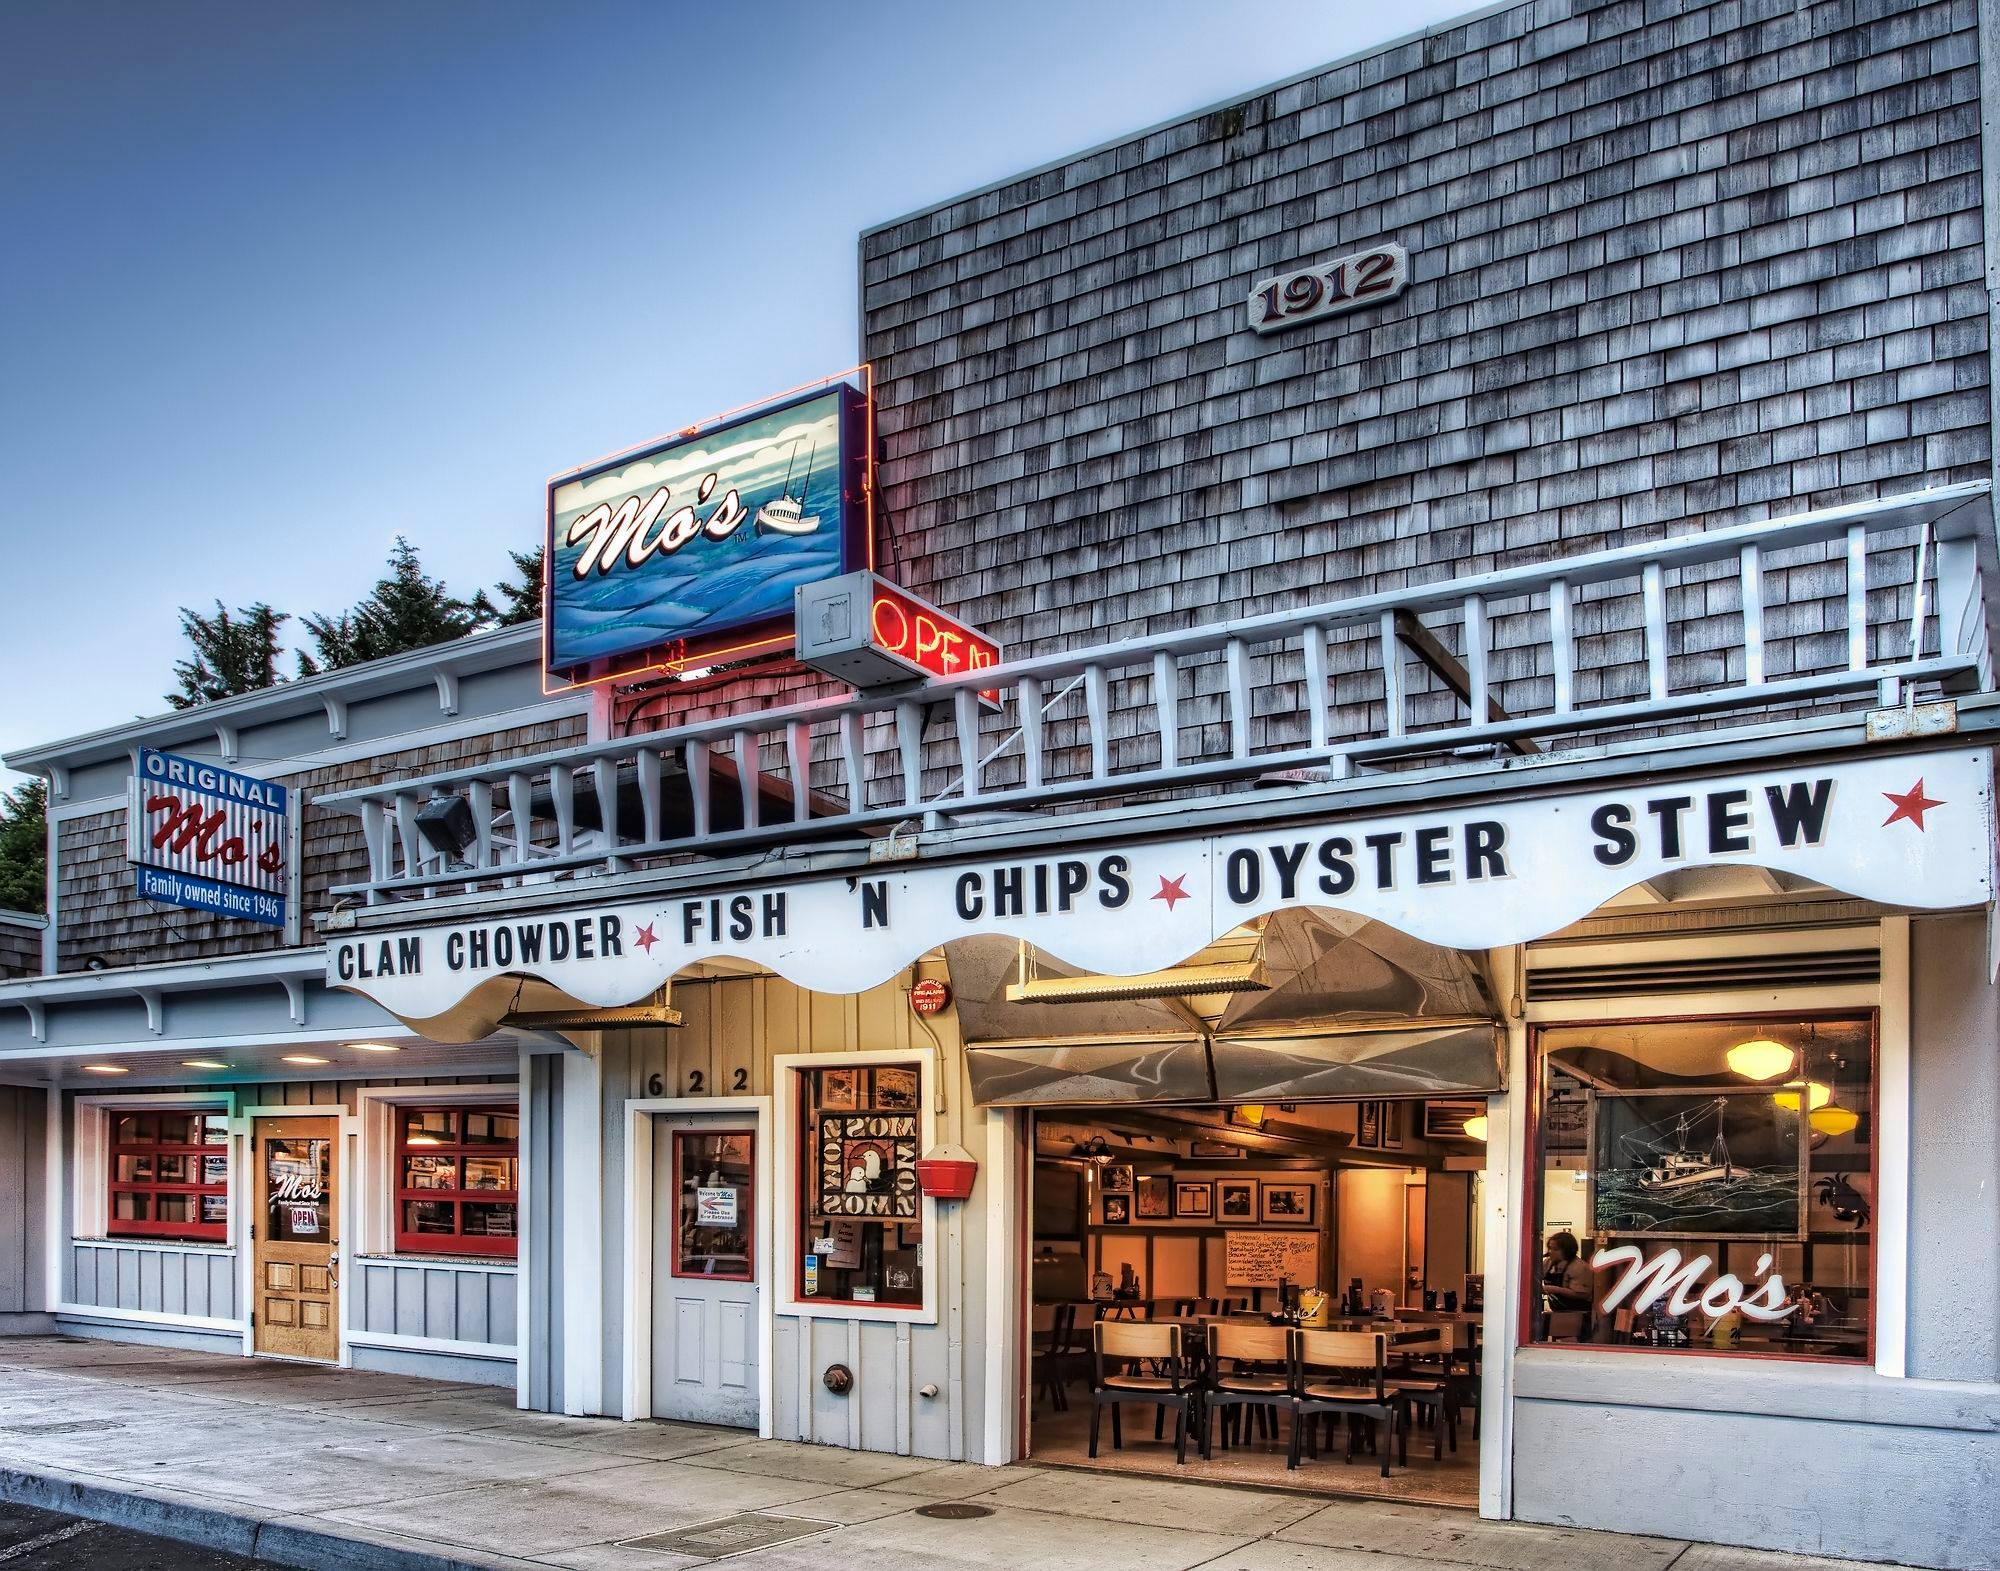 Get A Bowl Of World Famous Clam Chowder At This Newport, Oregon Restaurant